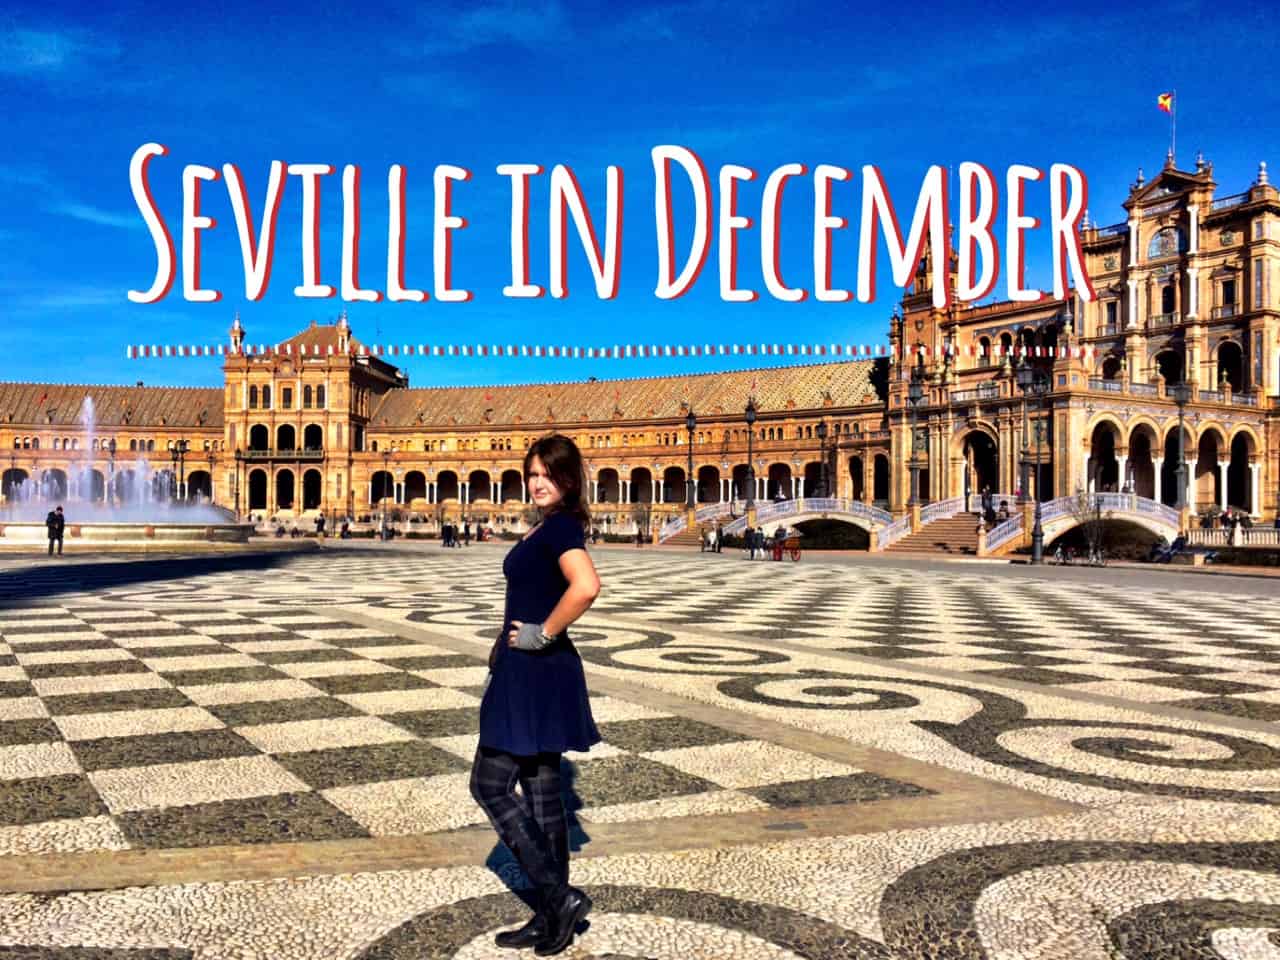 Things to do in Seville in December: free entrance to Alcazar Seville on Monday